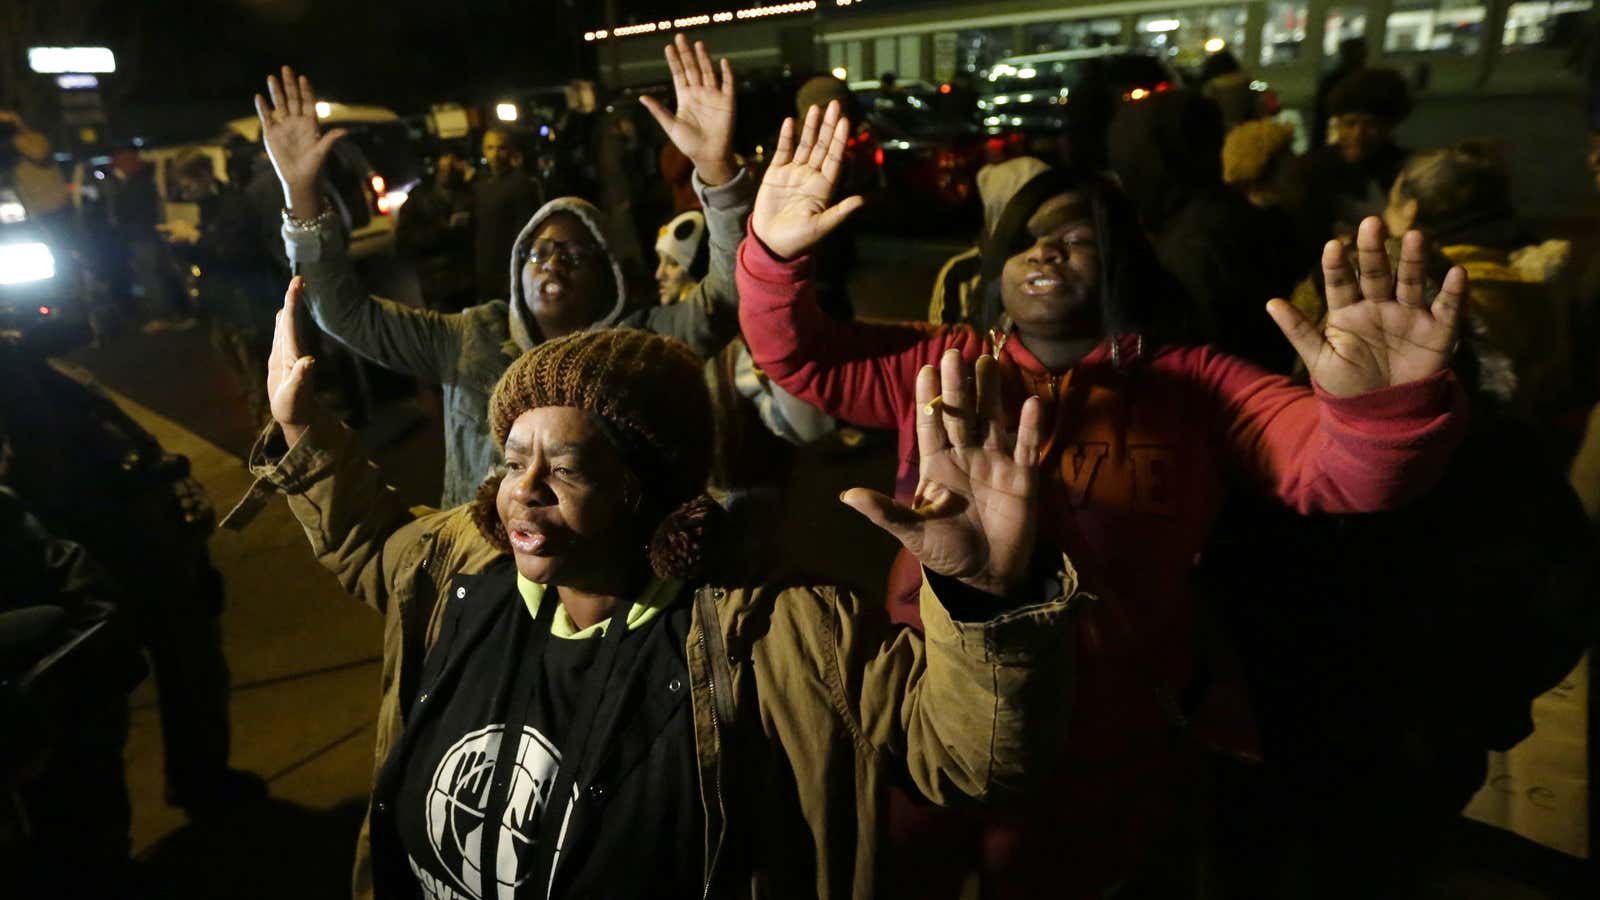 Barbara Jones, joined by other protesters, raises her hands, Monday, Nov. 24, 2014, in Ferguson, Mo., more than three months after an unarmed black 18-year-old man was shot and killed there by a white policeman.